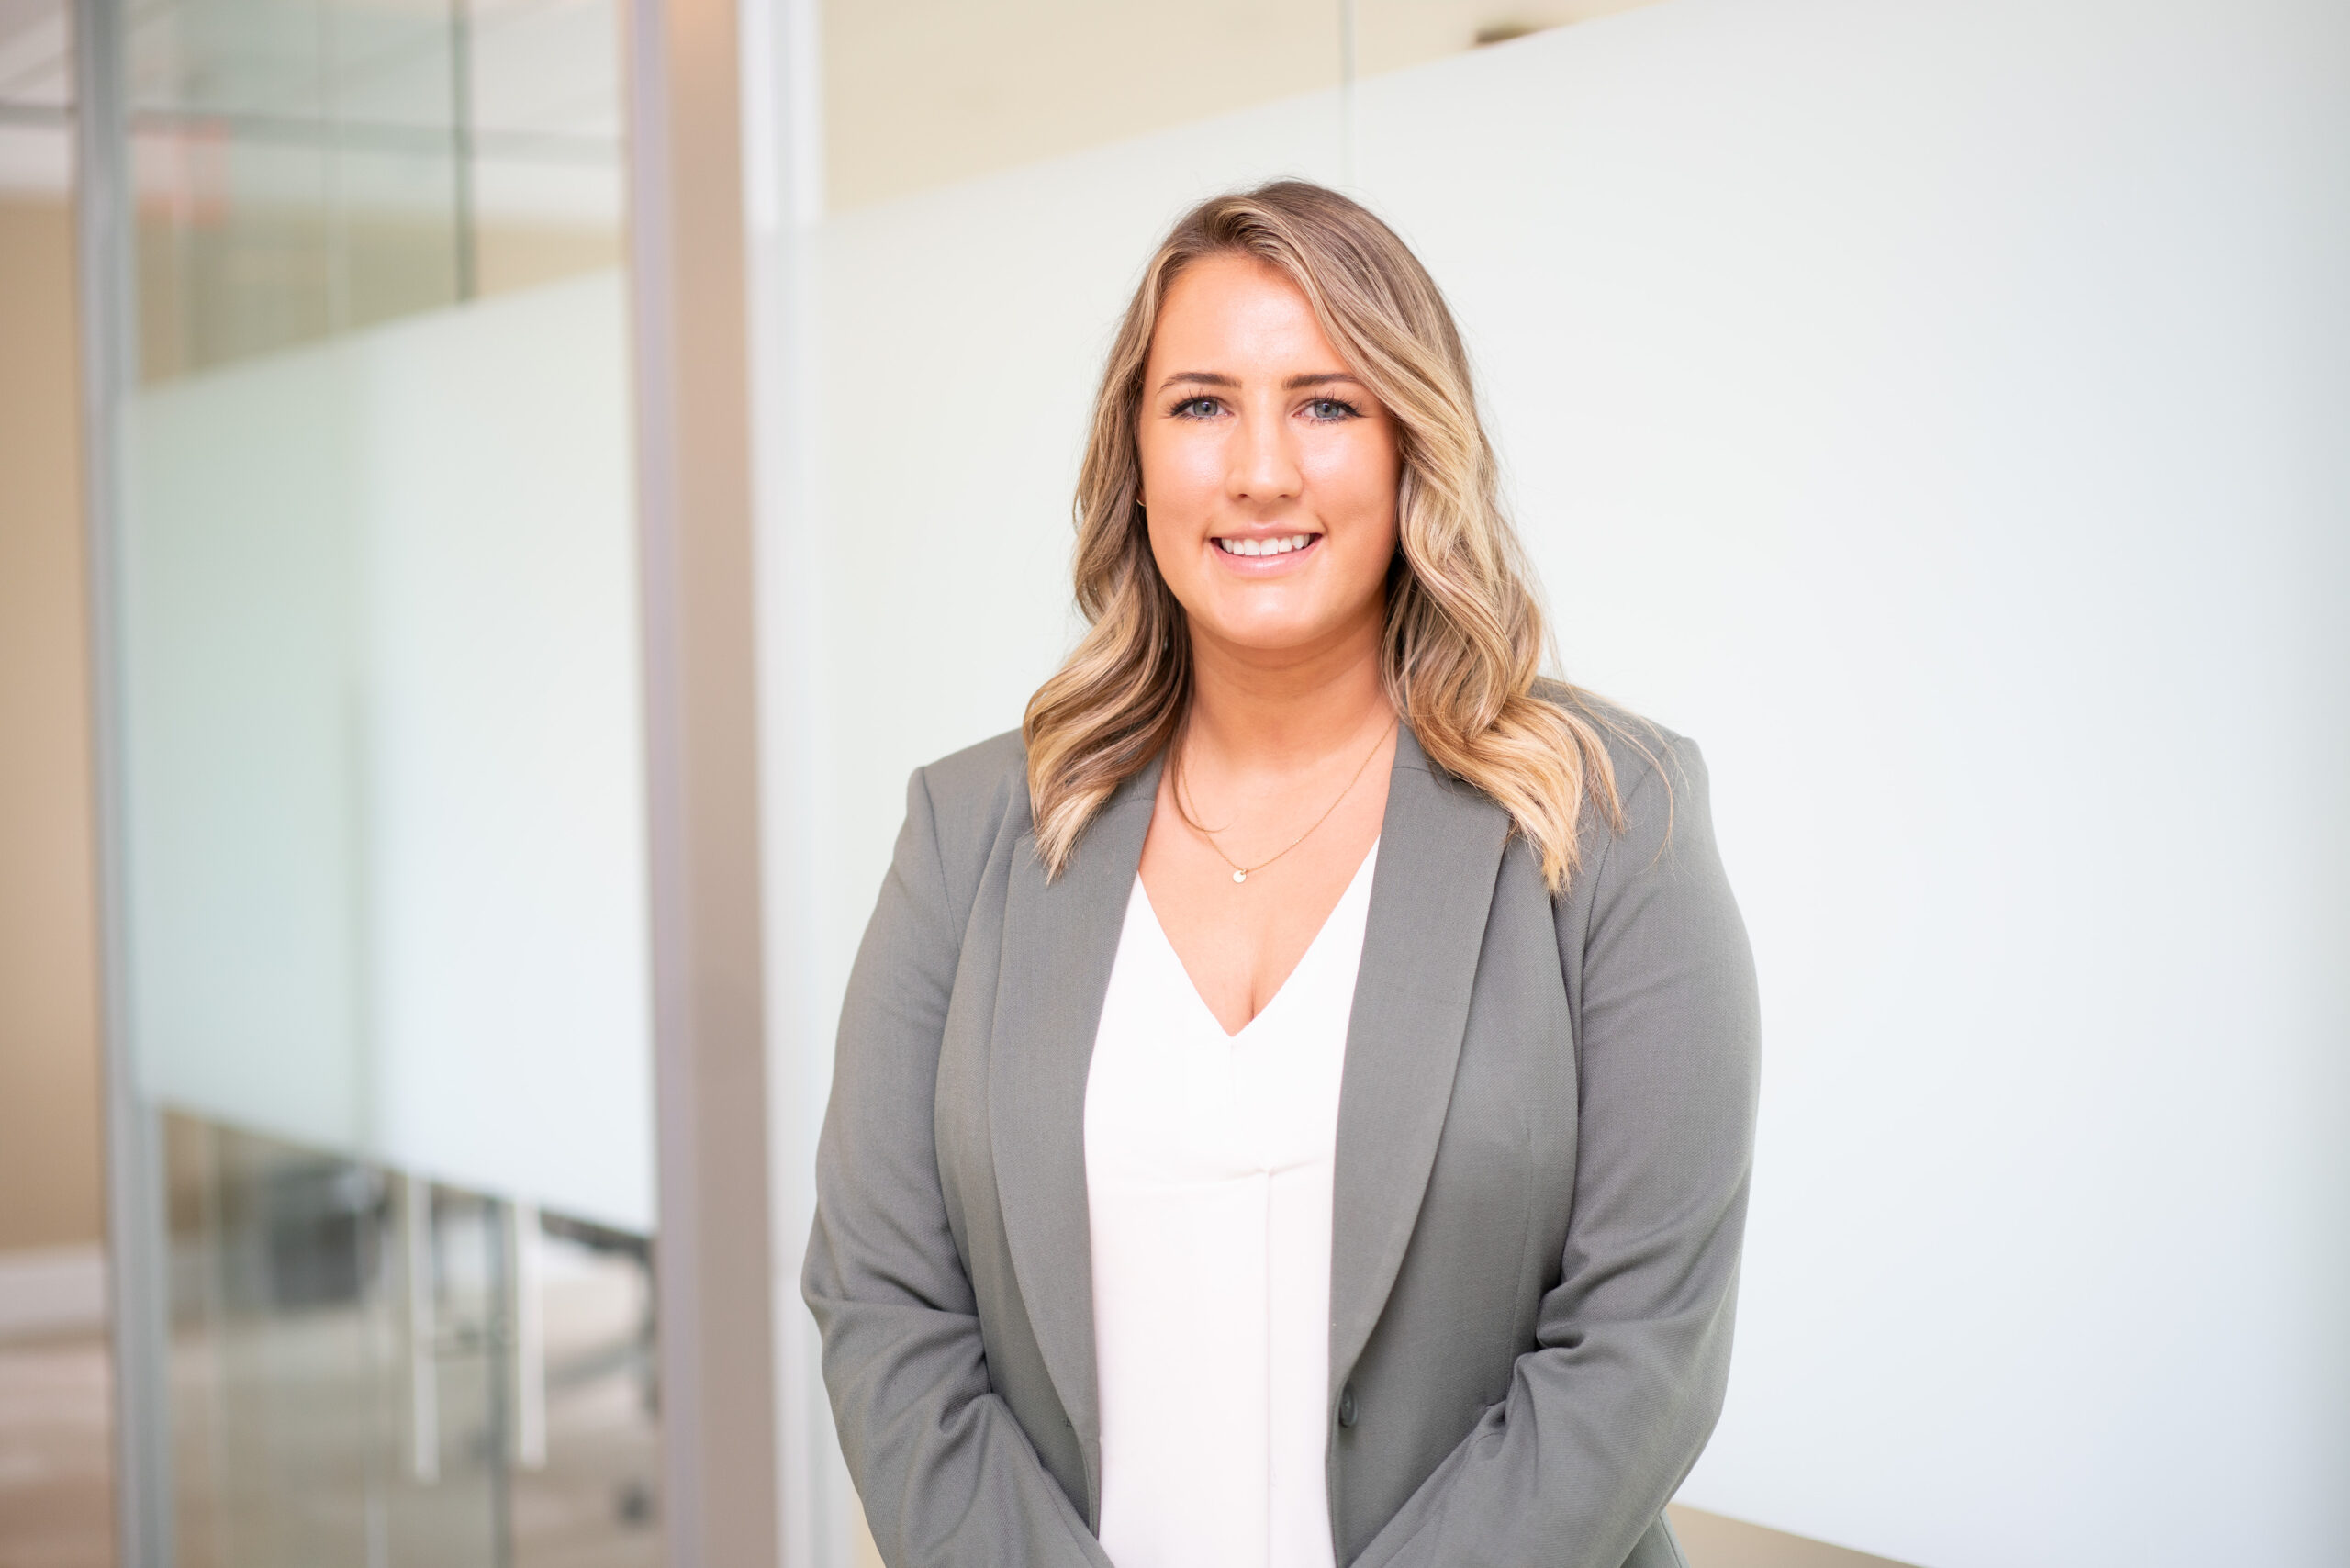 Anna Bunce Senior Associate in the audit and accounting department